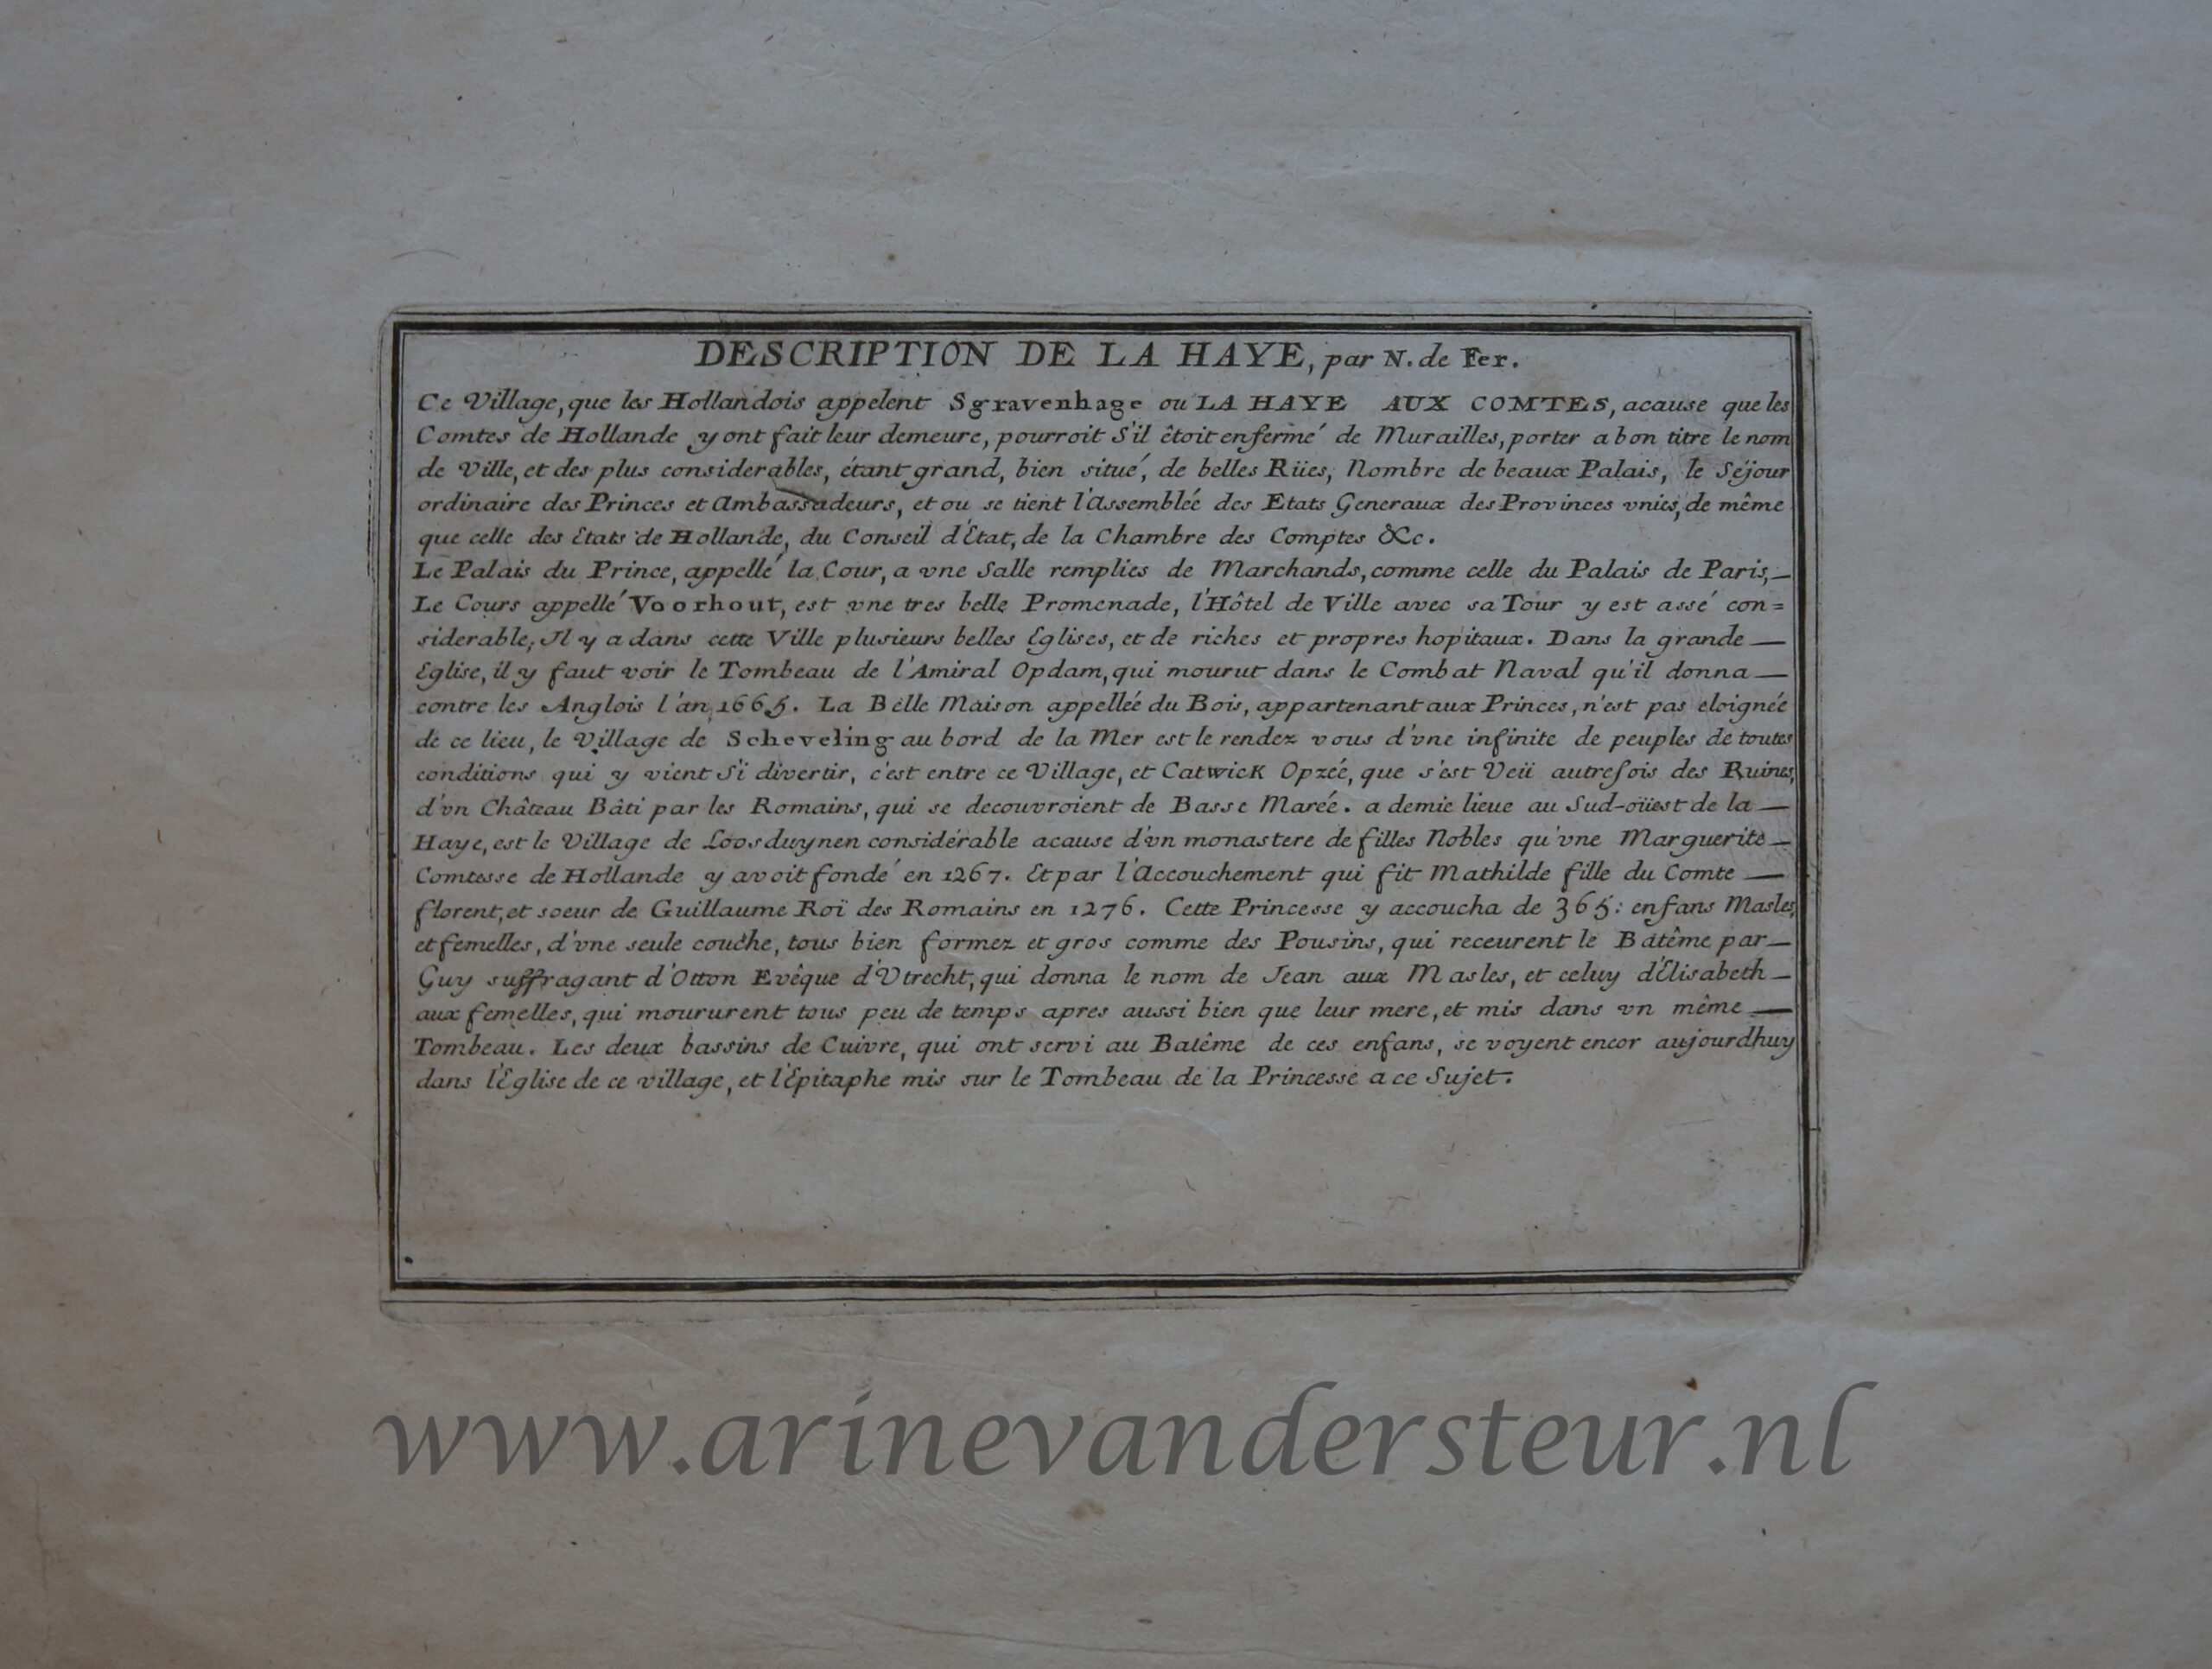 [Cartography, antique print, etching] LA HAIE (The Hague/Den Haag), published 1705.